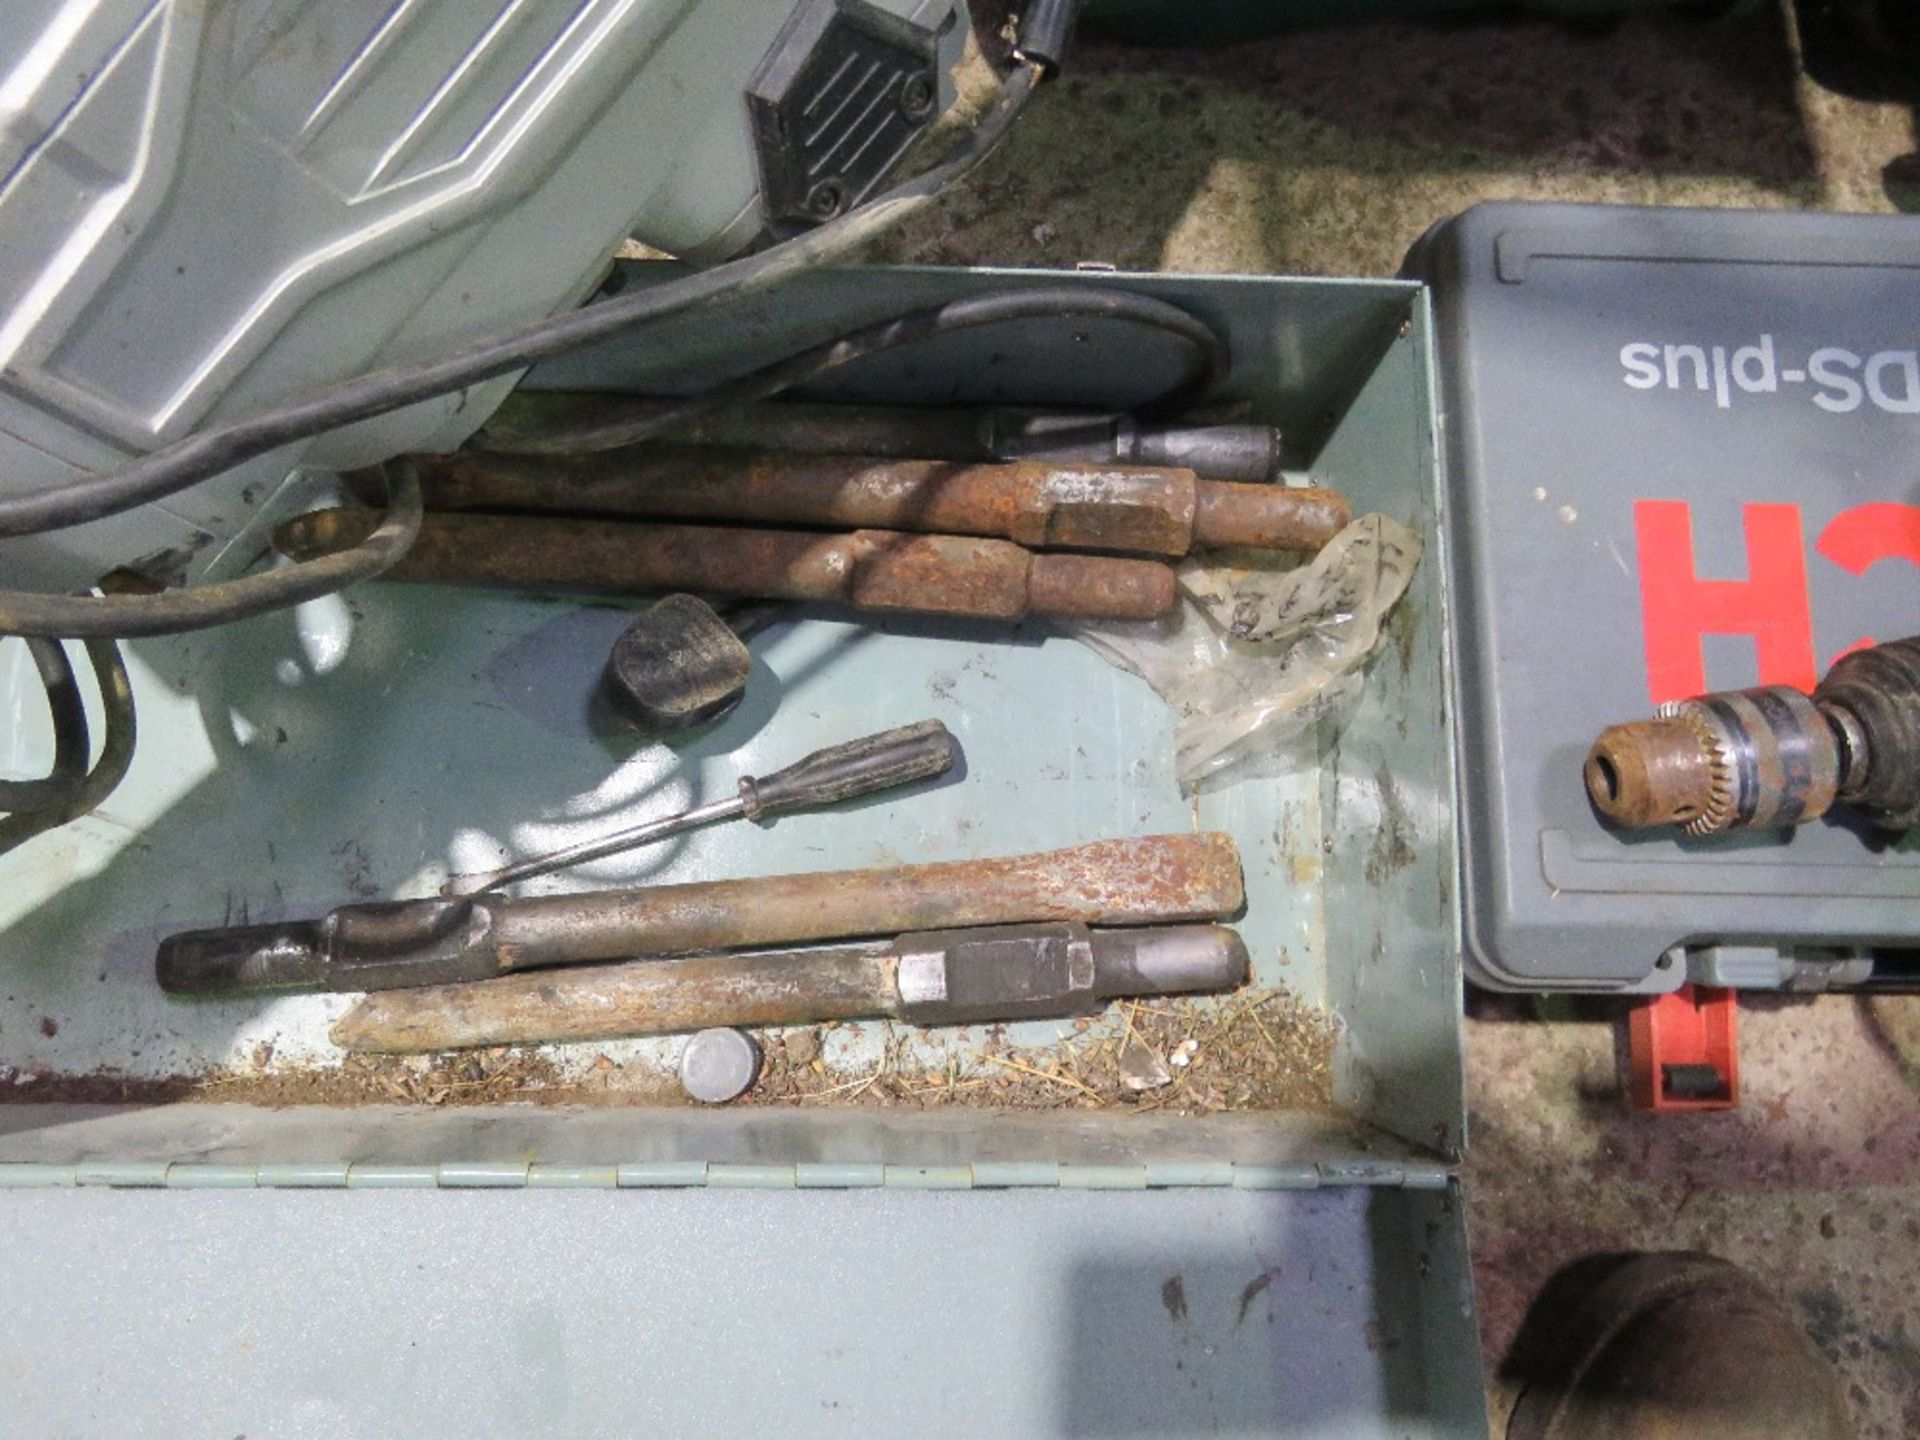 HEAVY DUTY BREAKER DRILL IN A BOX, INCLUDING POINTS, 240V POWERED. THIS LOT IS SOLD UNDER THE AU - Image 4 of 6